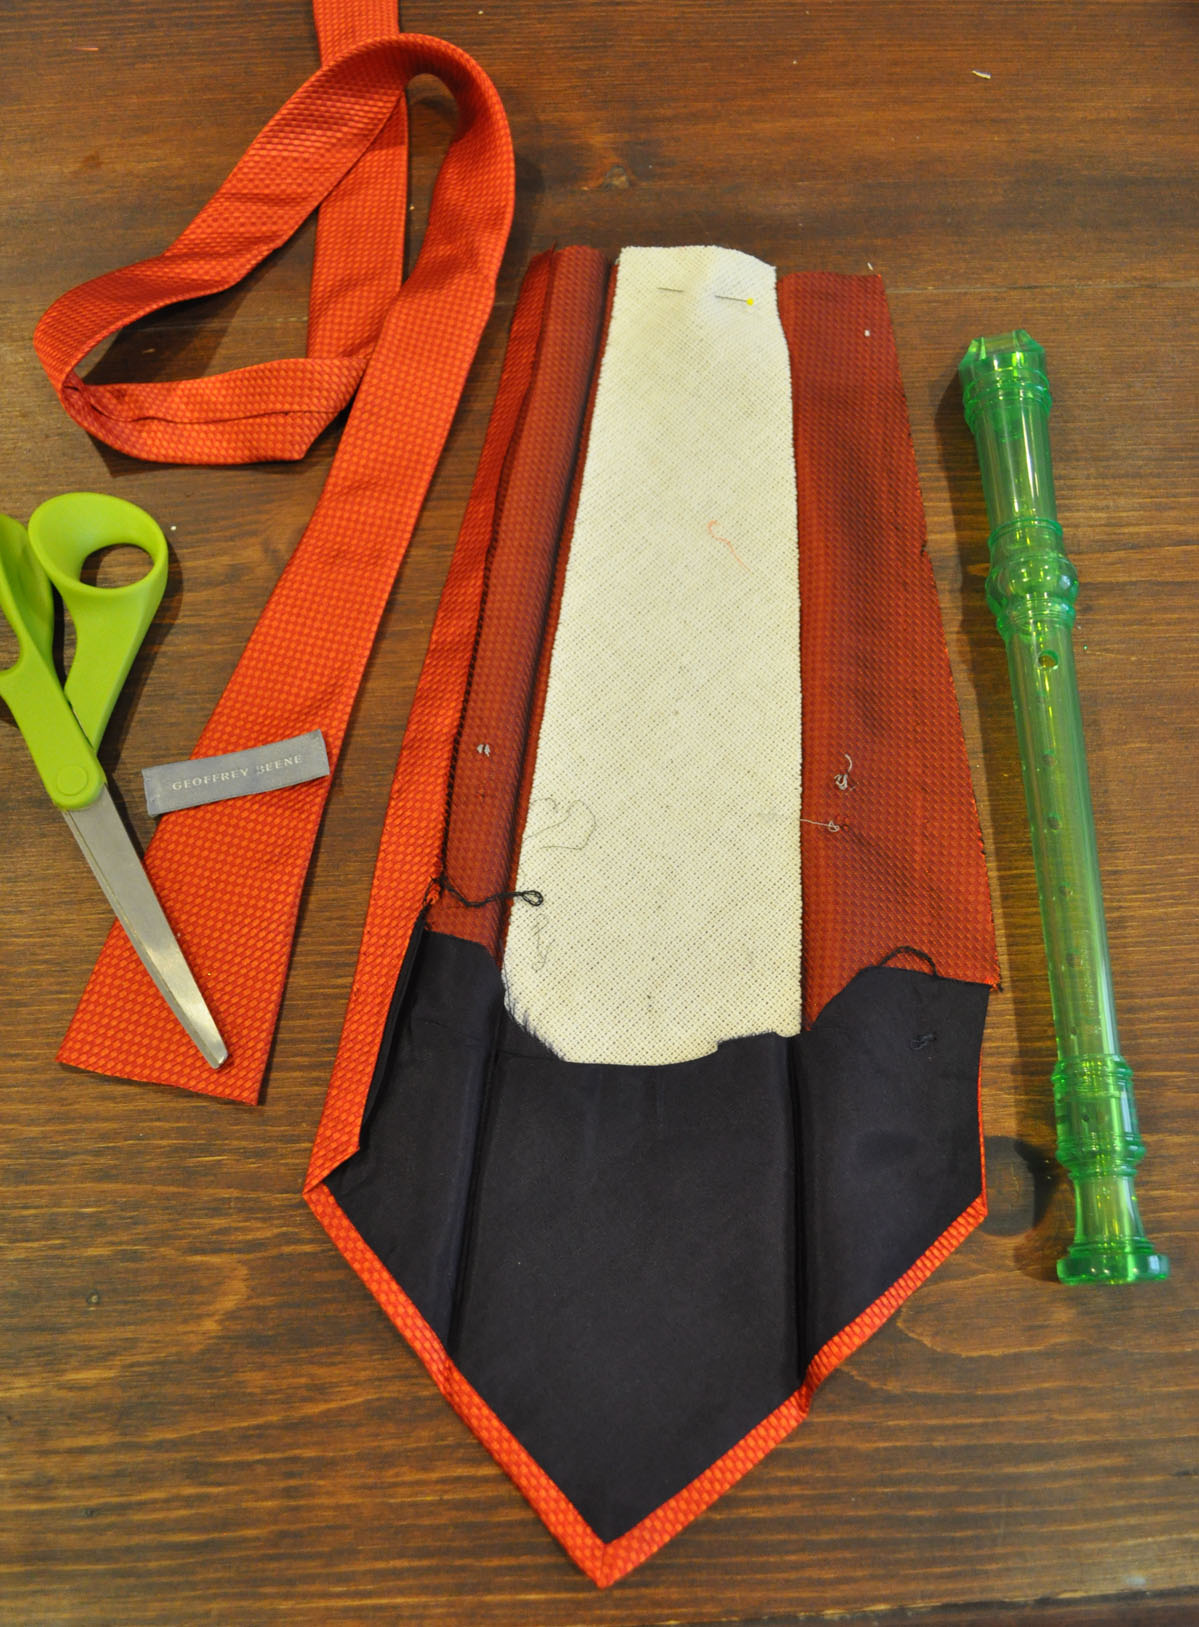 Necktie Key Ring Tutorial - Positively Splendid {Crafts, Sewing, Recipes  and Home Decor}